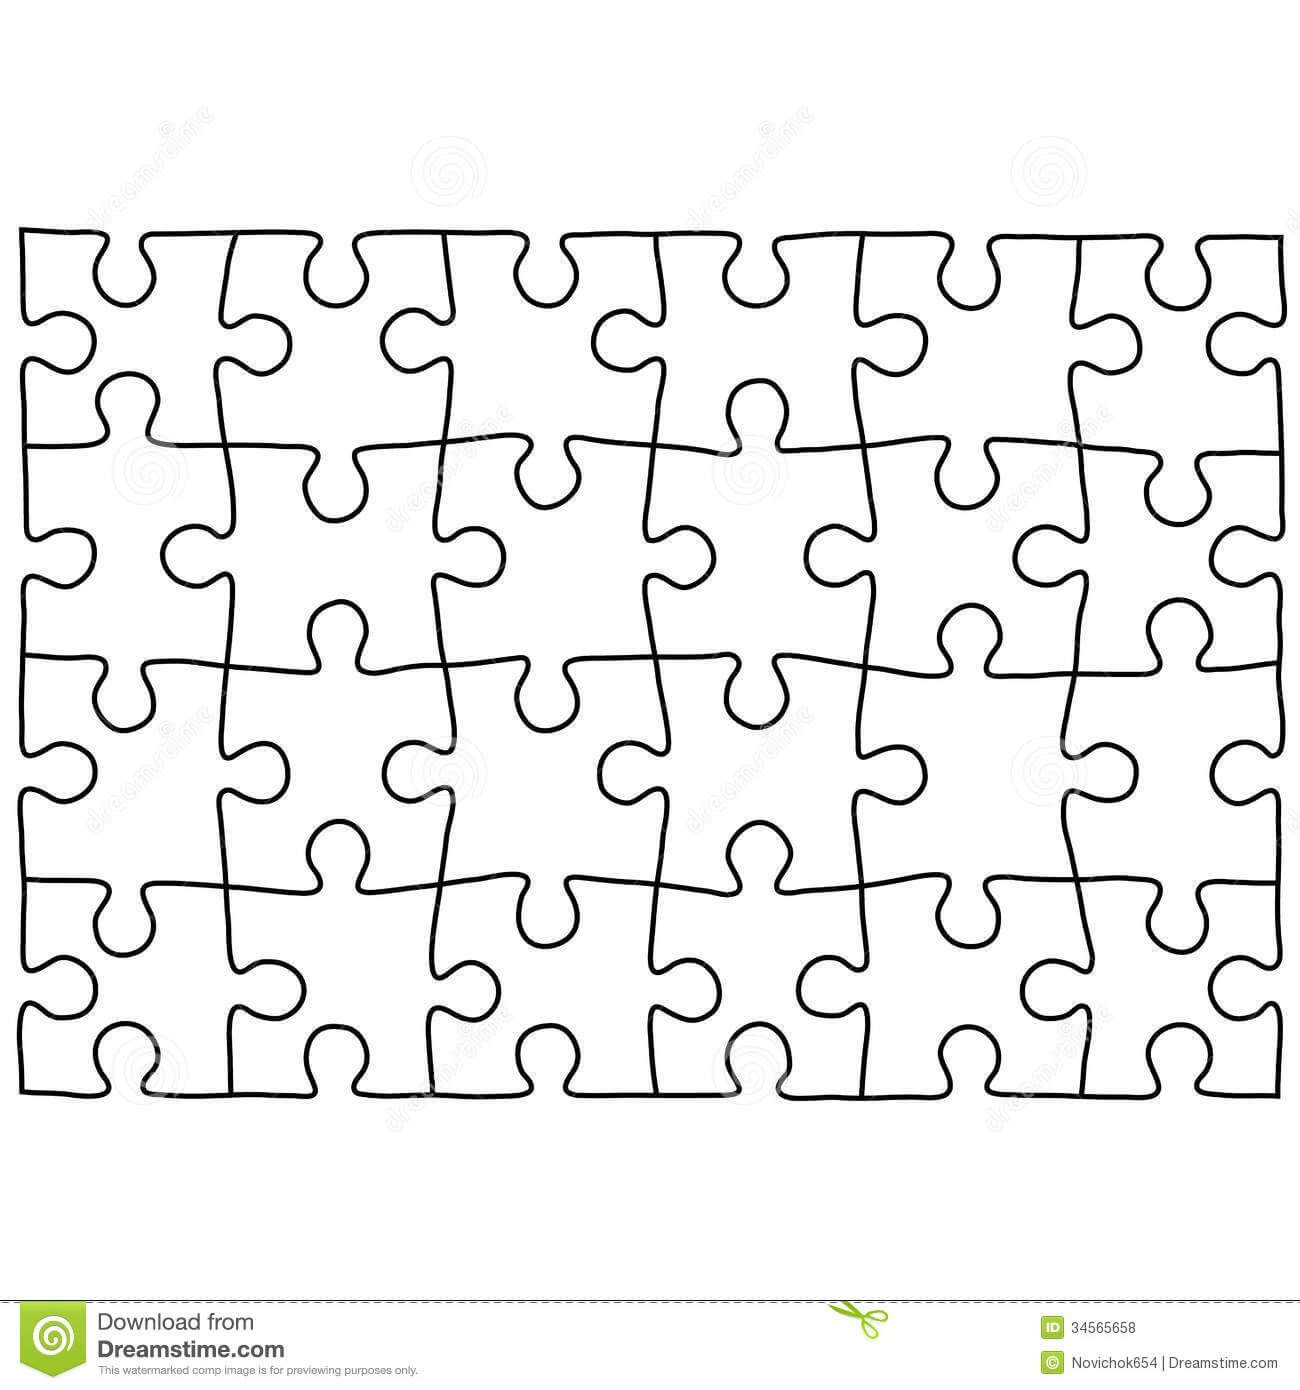 026 Jig Saw Puzzle Template Ideas Astounding Jigsaw Pertaining To Jigsaw Puzzle Template For Word